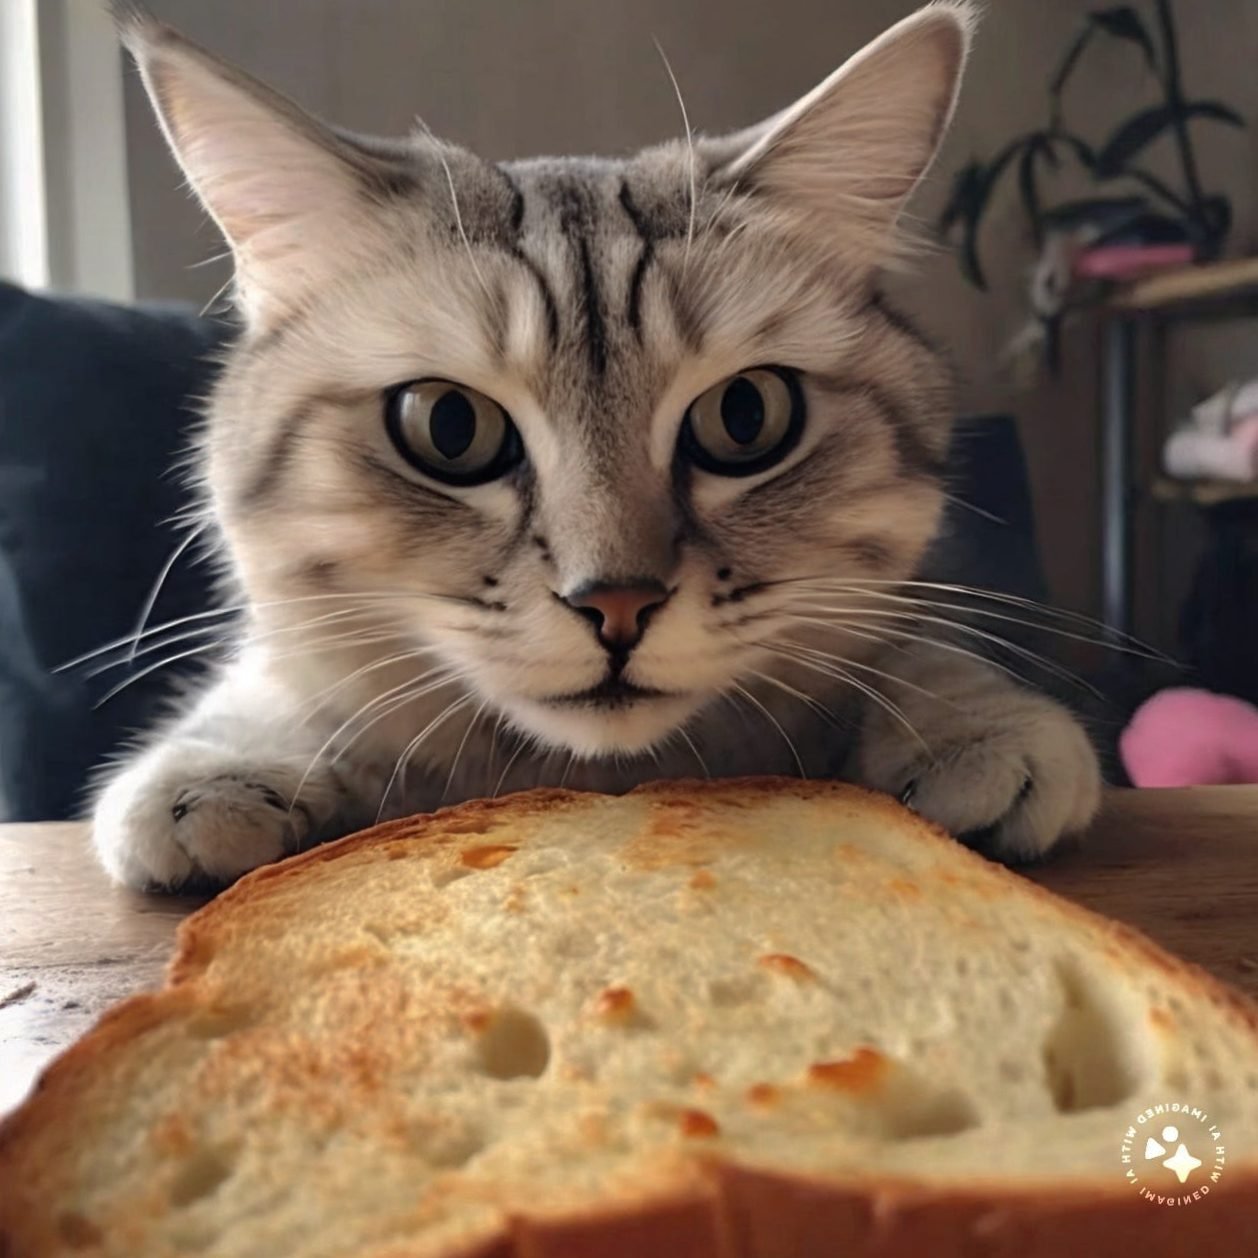 Can cats eat bread with butter